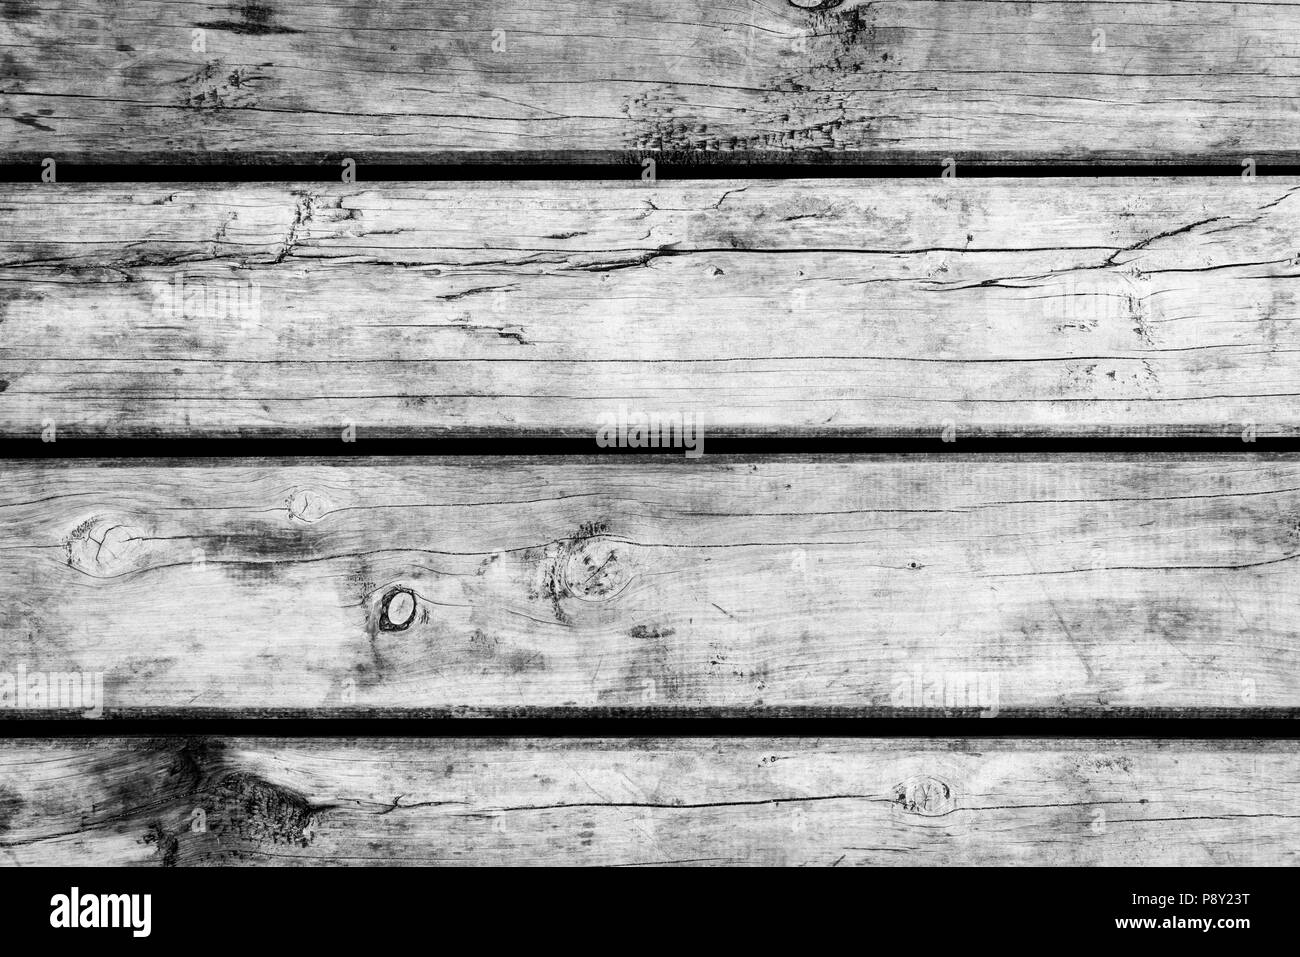 Weathered wooden floorboards background texture in black and white Stock Photo